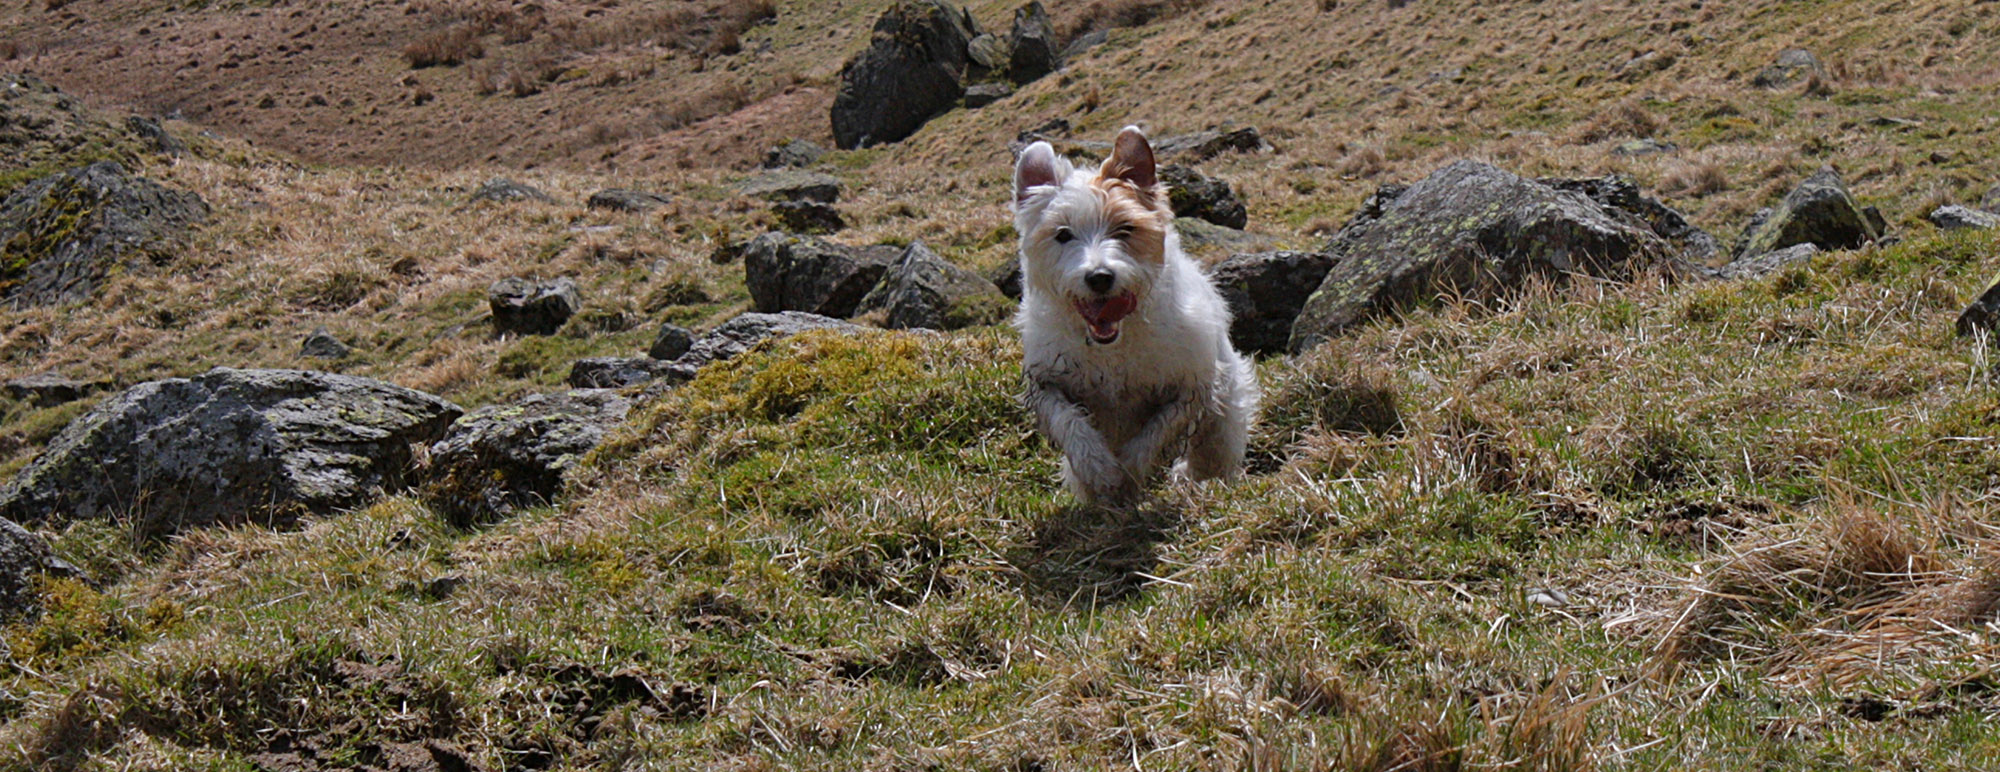 A small dog running pell-mell toward the camera with his tongue hanging out.